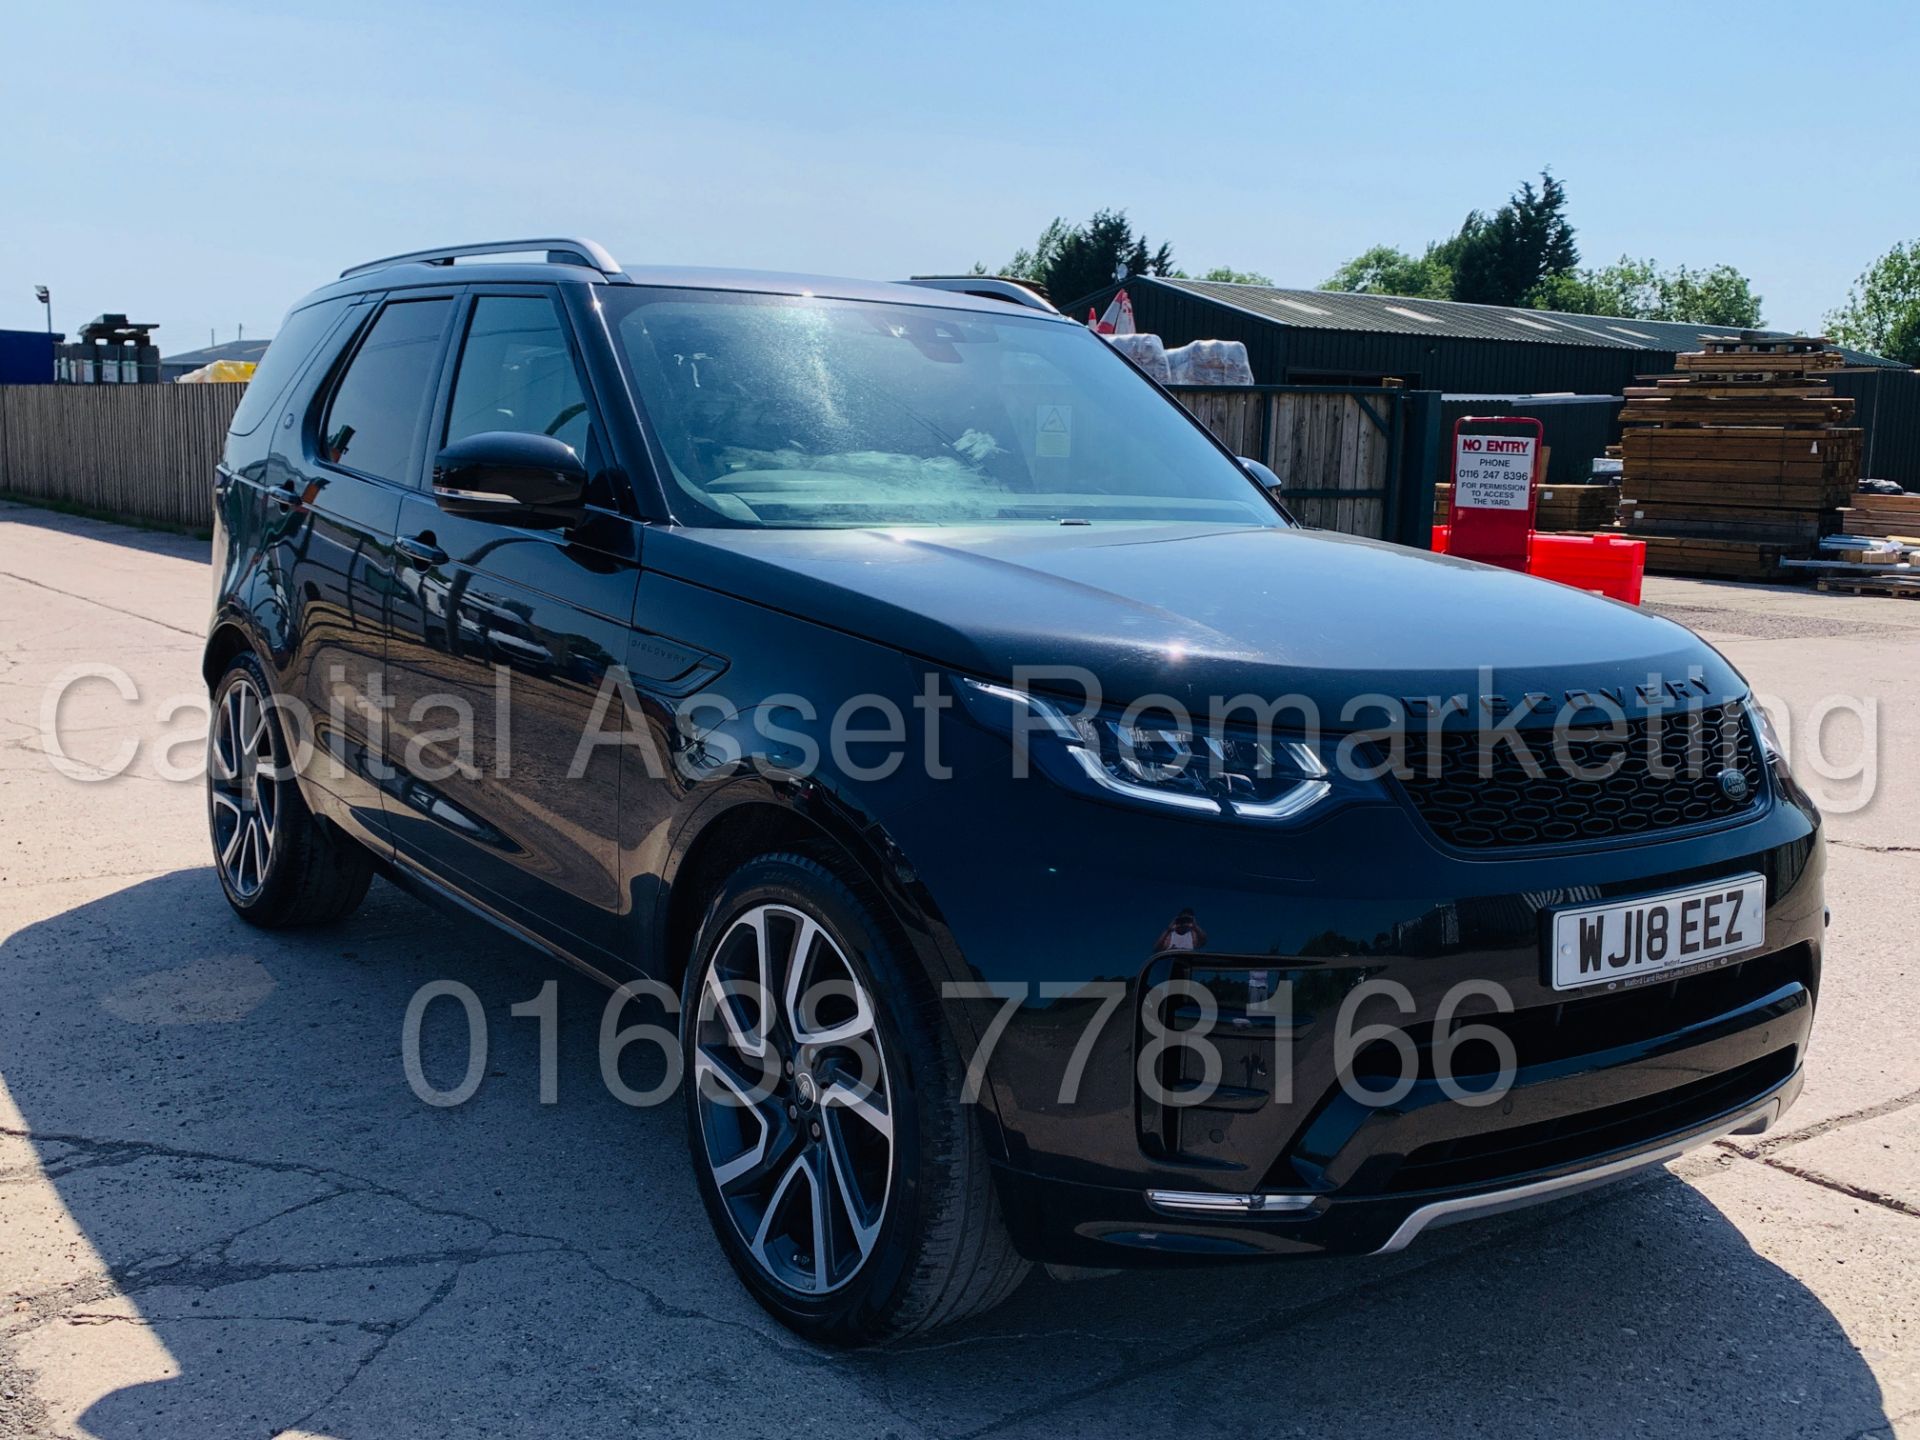 LAND ROVER DISCOVERY *HSE Dynamic* 7 SEATER SUV (2018 - NEW MODEL) '3.0 TD6 - 258 BHP -8 SPEED AUTO' - Image 3 of 68